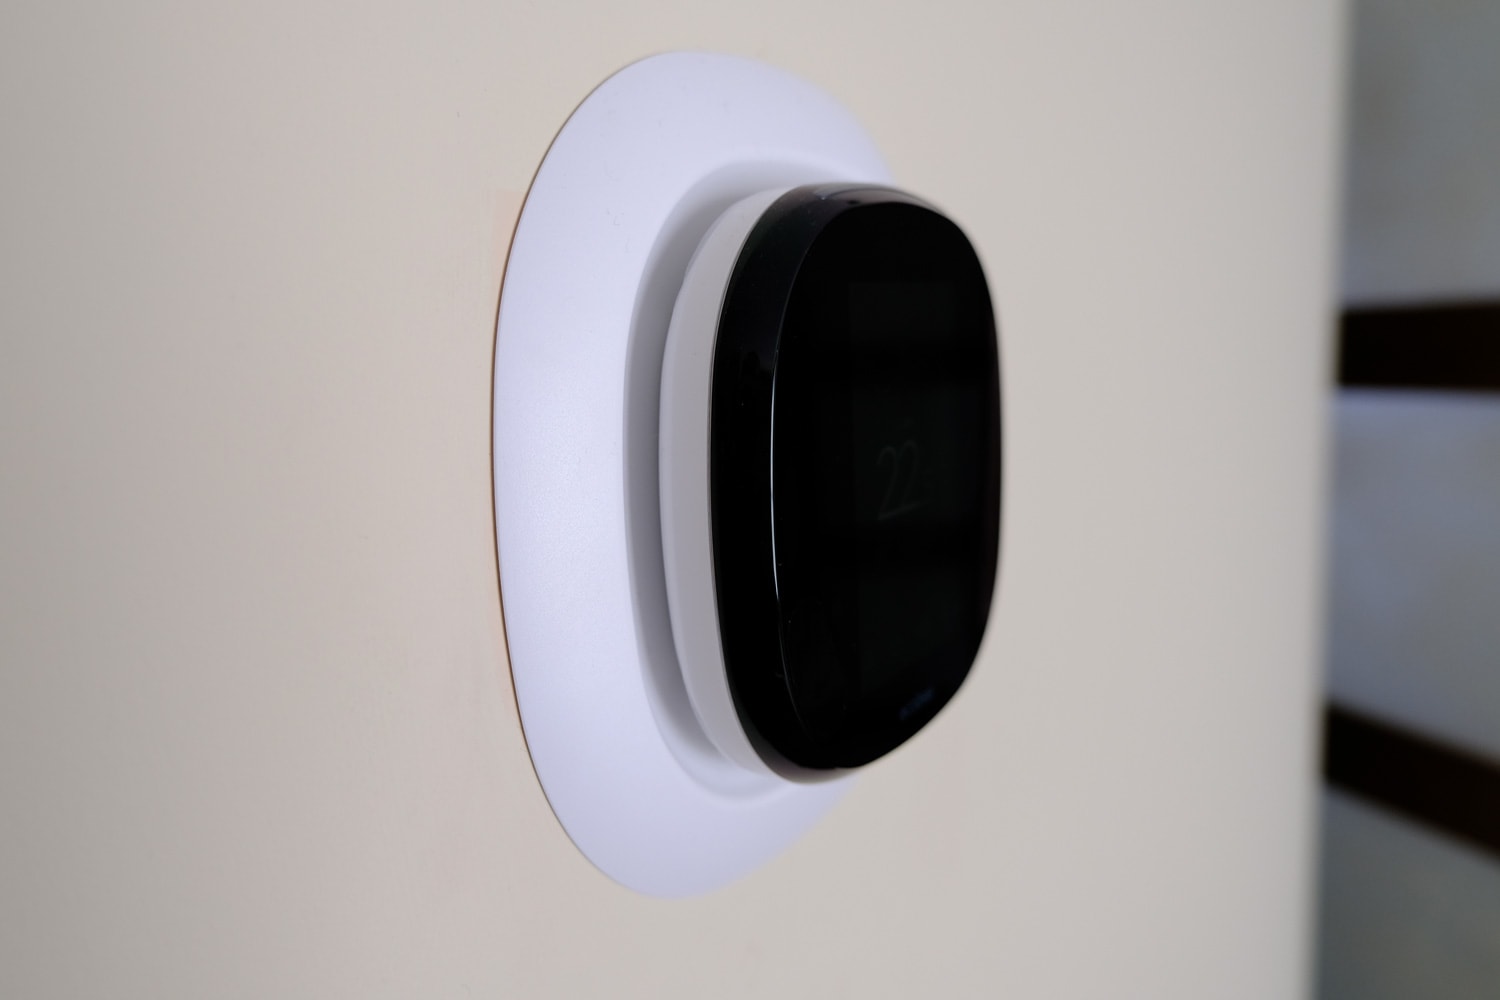 Energy-saving thermostat for temperature control. Modern design, ecobee style installed on the wall. Green energy.